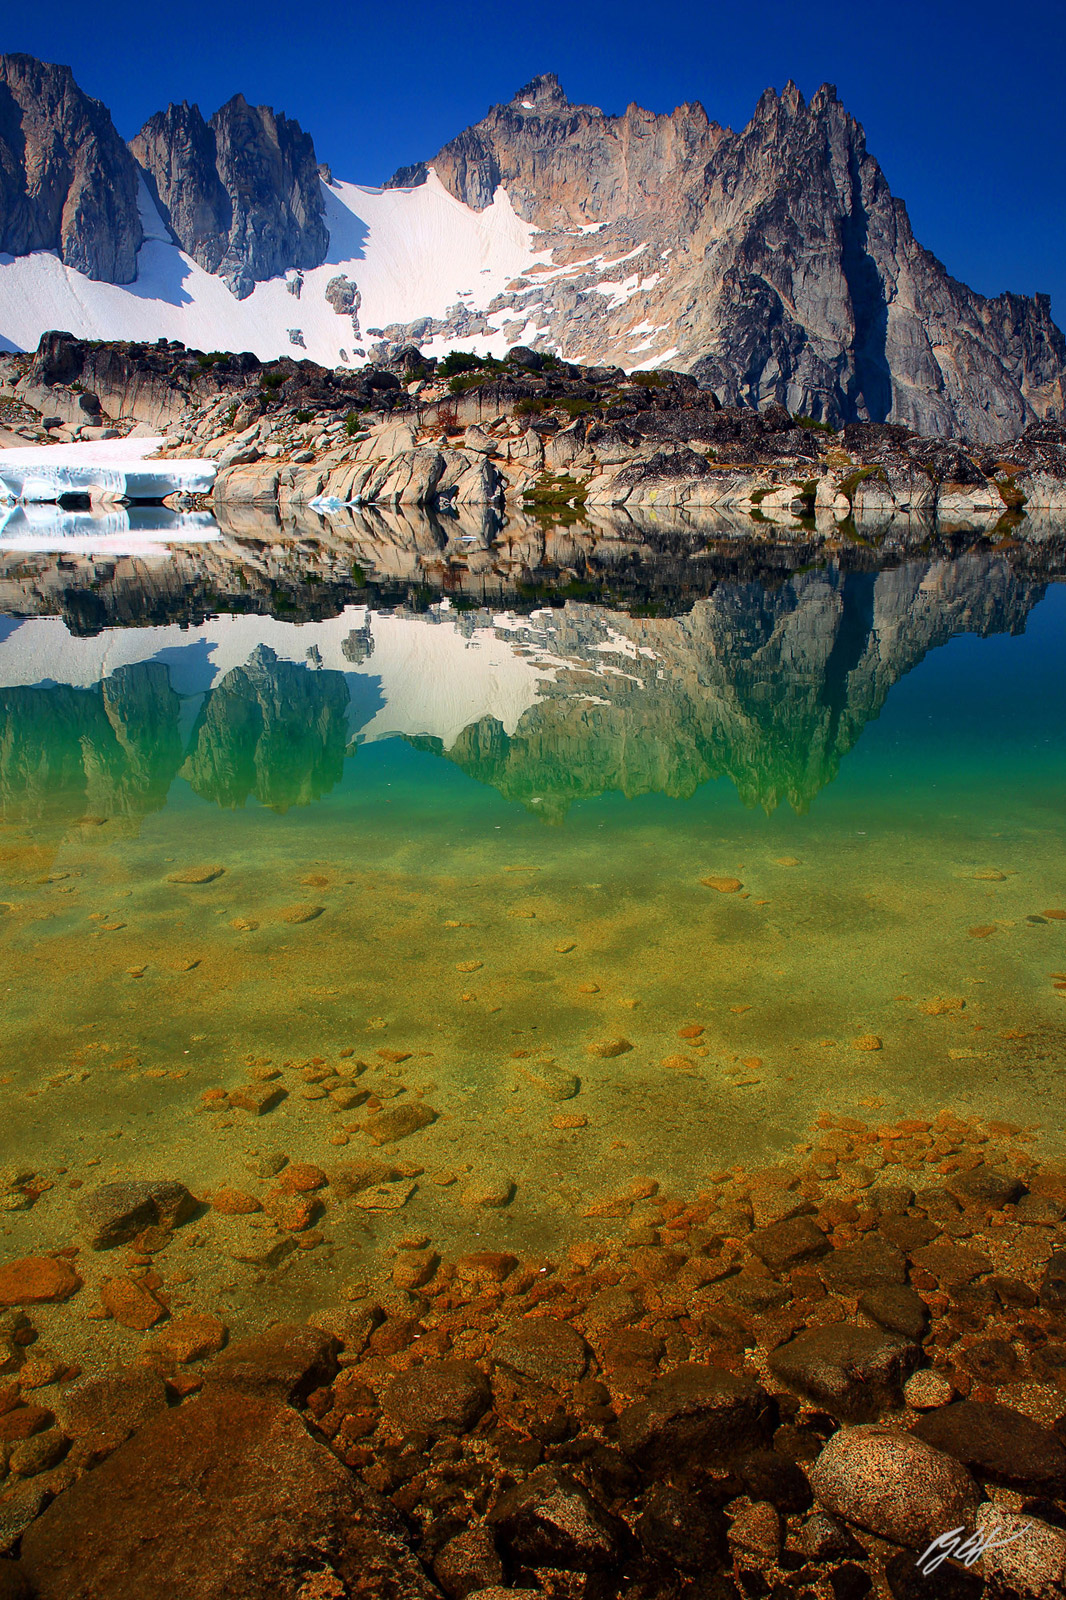 Dragontail Peak Reflected in Tranquil Lake, in The Enchantments, part of the Alpine Lakes Wilderness, Washington